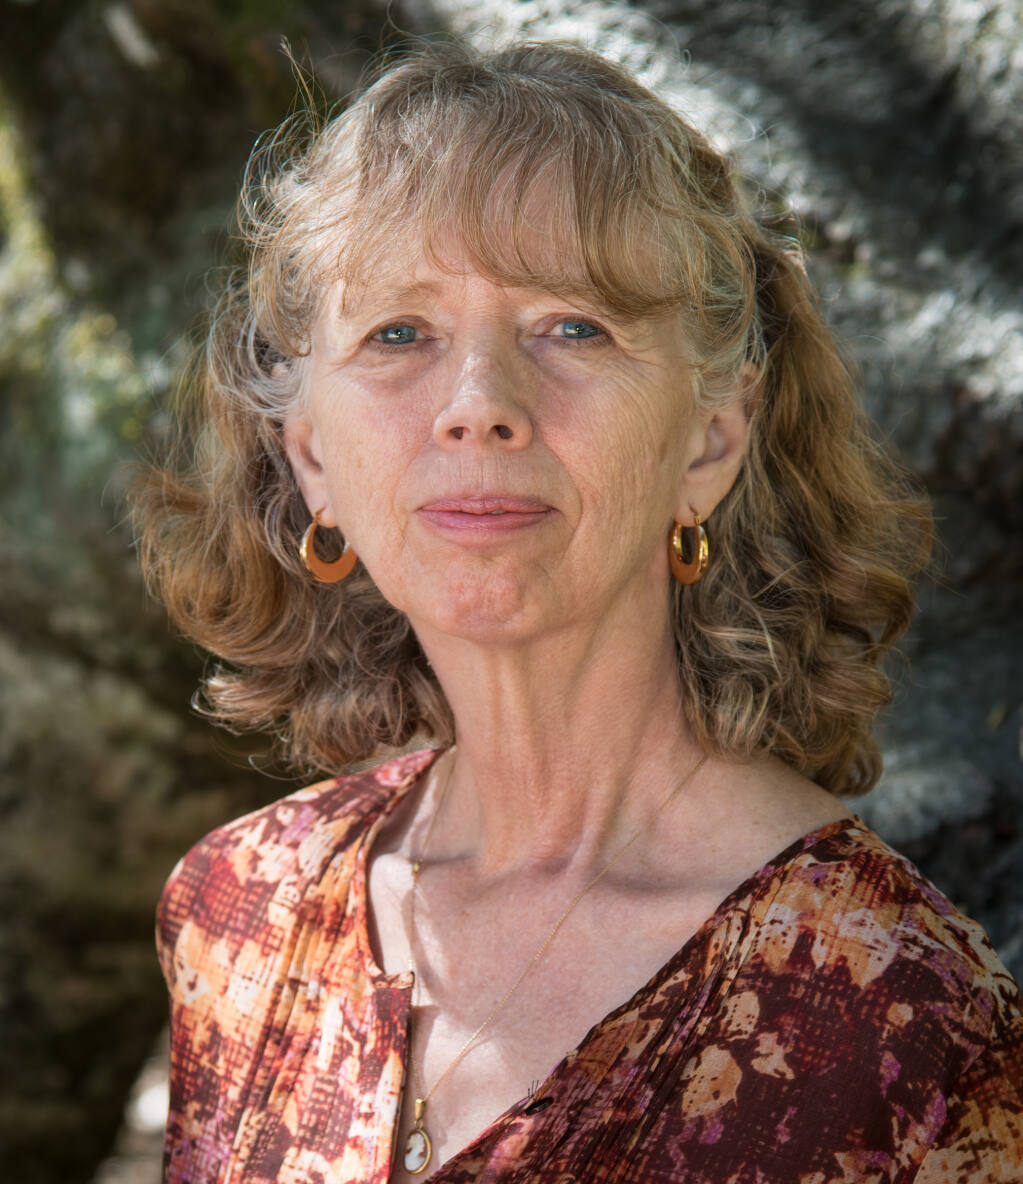 Phyllis Meshulam has been named the new Sonoma County Poet Laureate for 2020-2022. JERRY MESHULAM